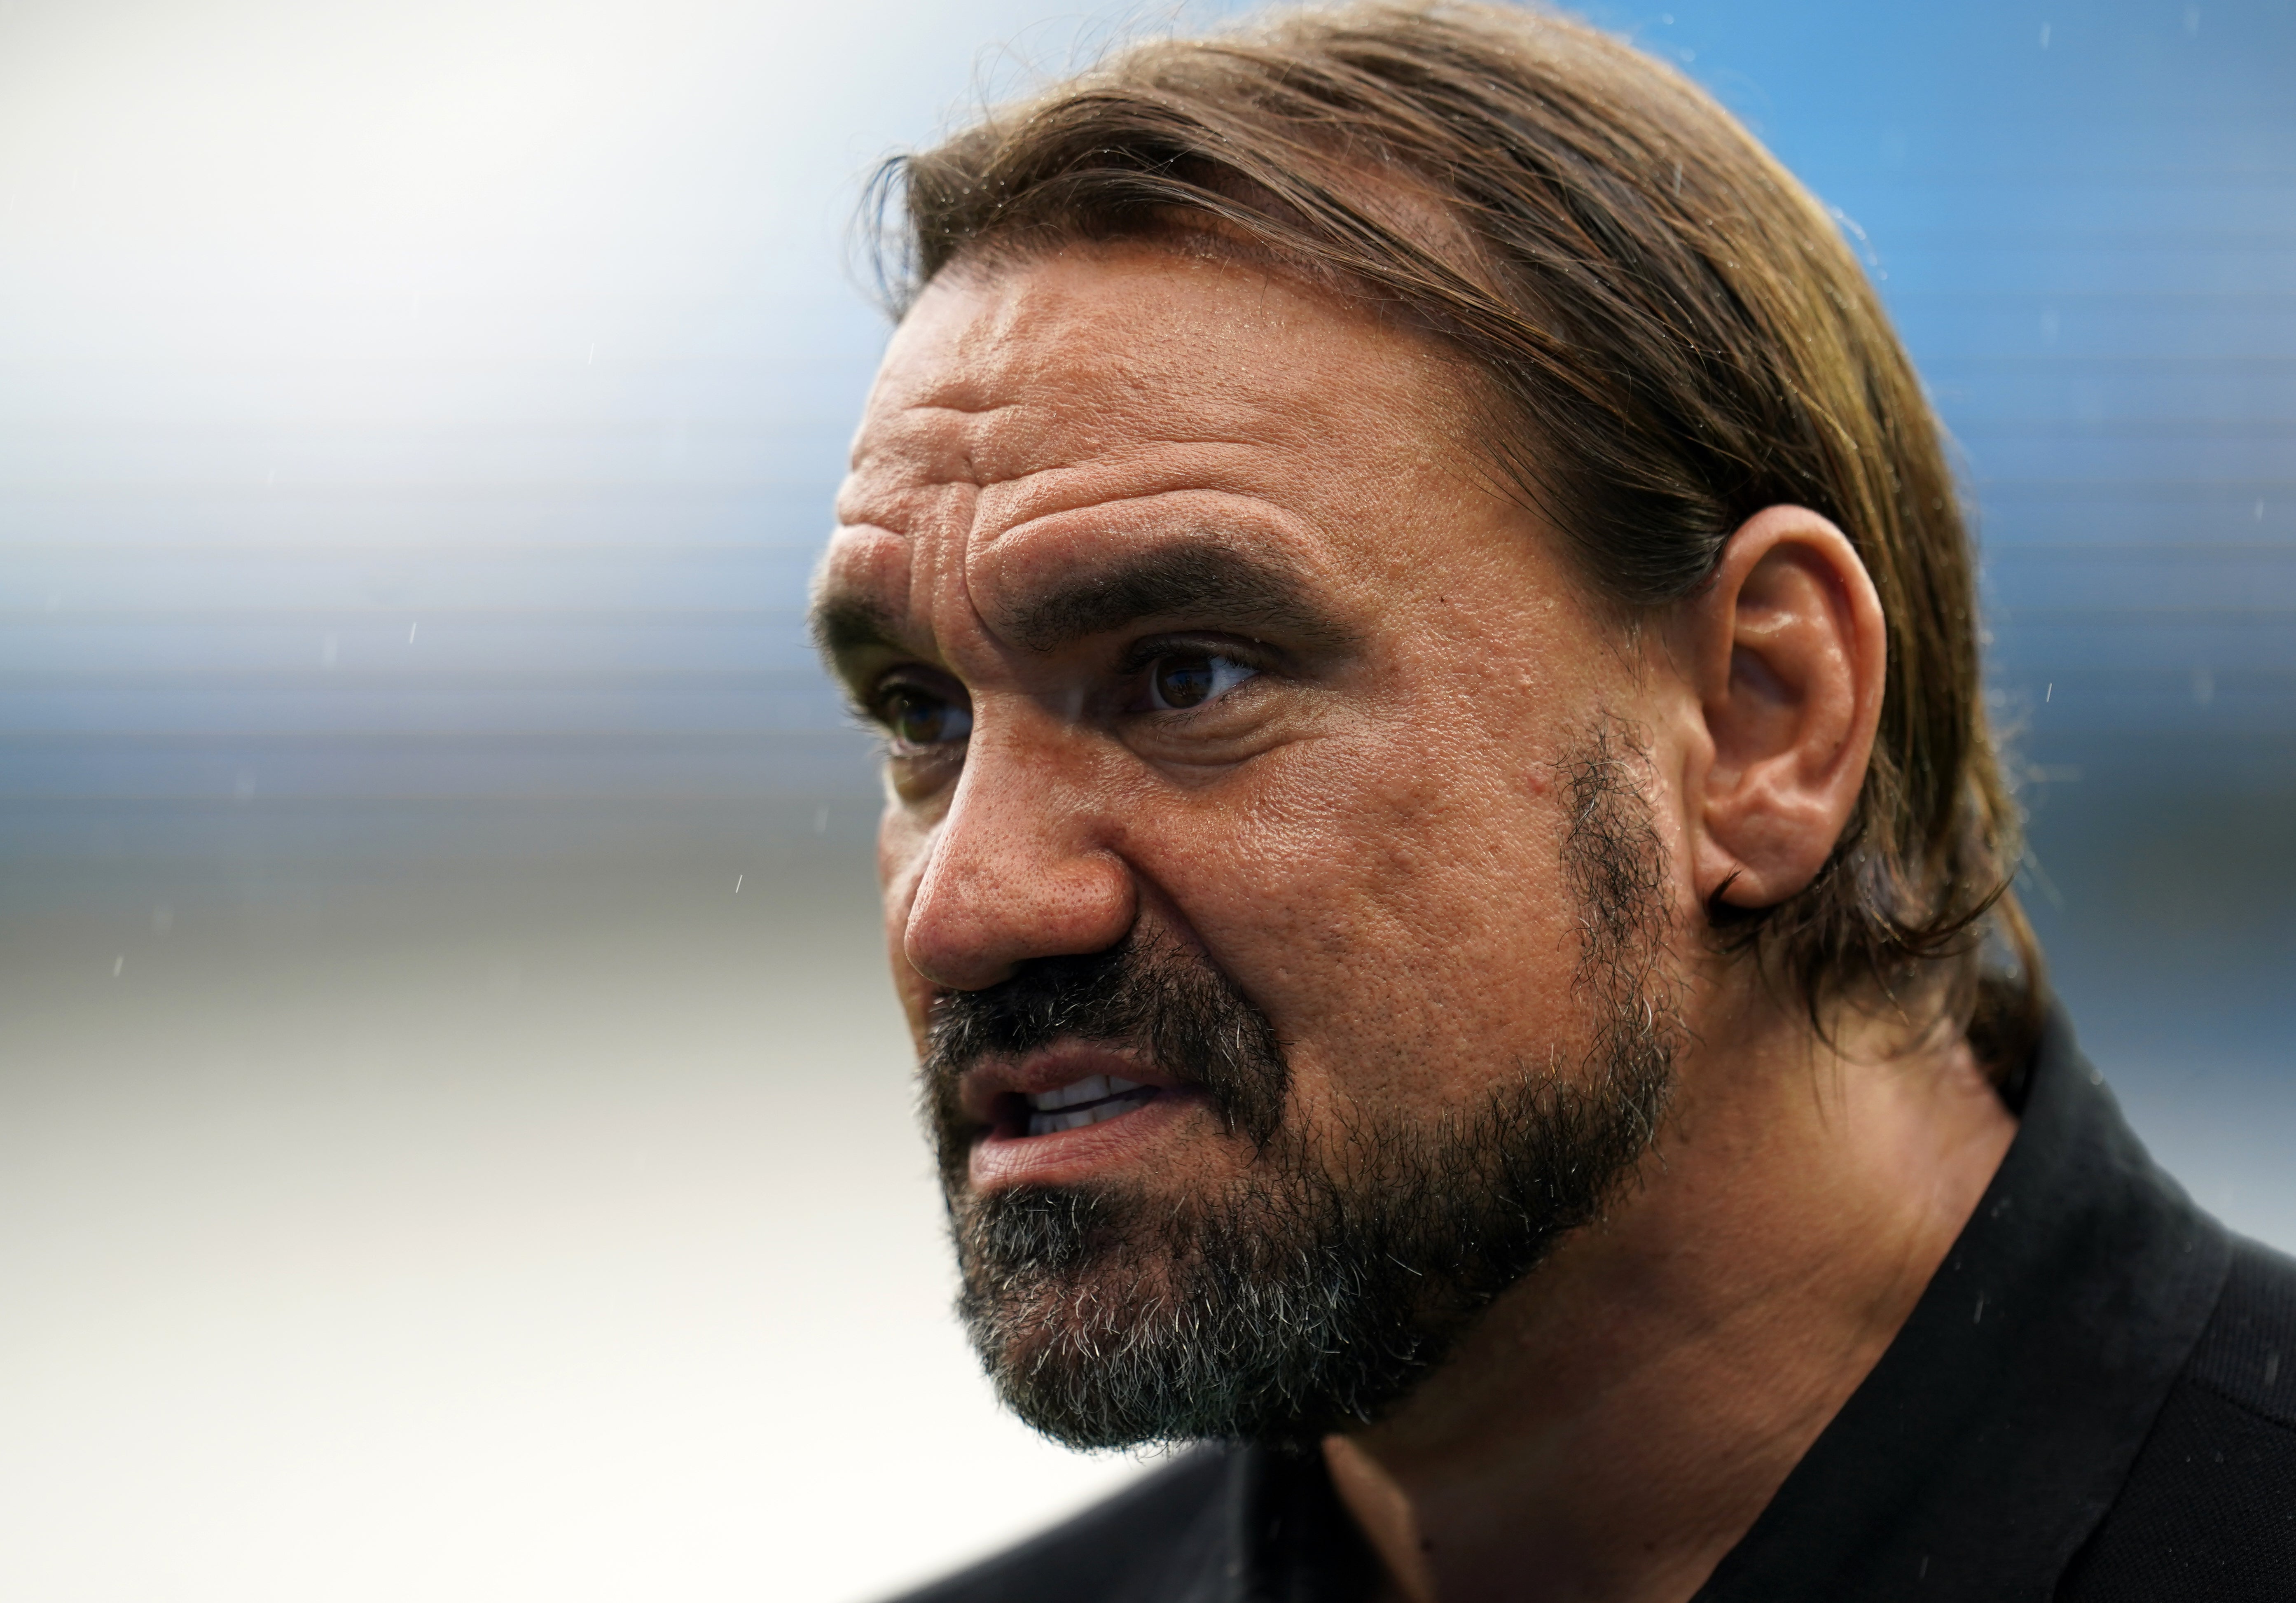 Daniel Farke is remaining calm despite an ominous start for the Canaries